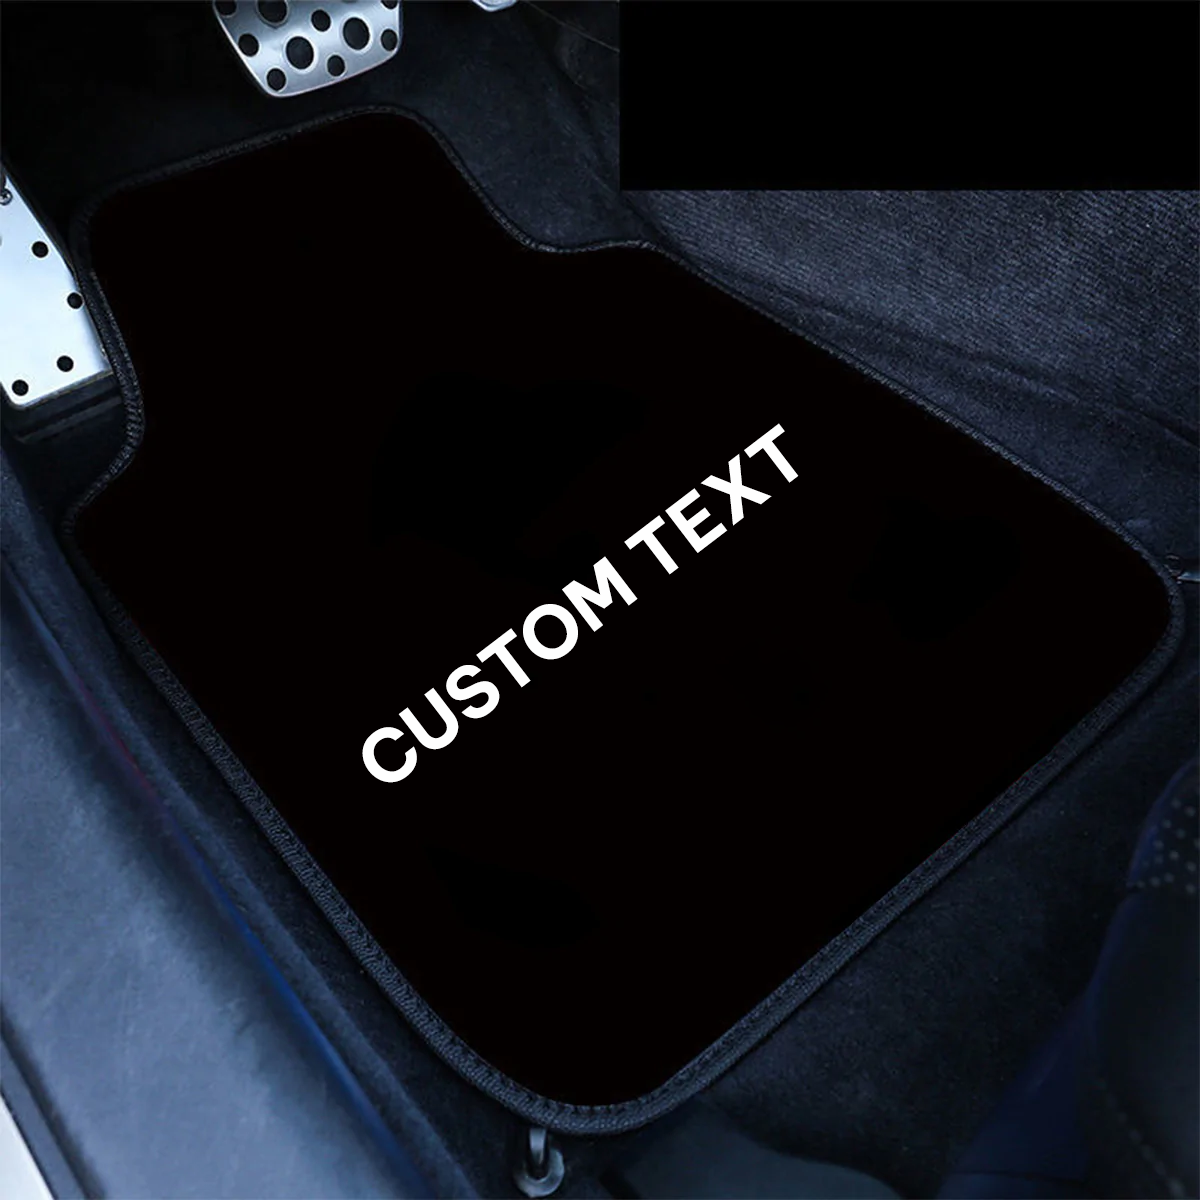 Custom Text and Logo Carpet Floor Mats Set of 4pcs, Fit with all car, All Weather Protection, Universal Type